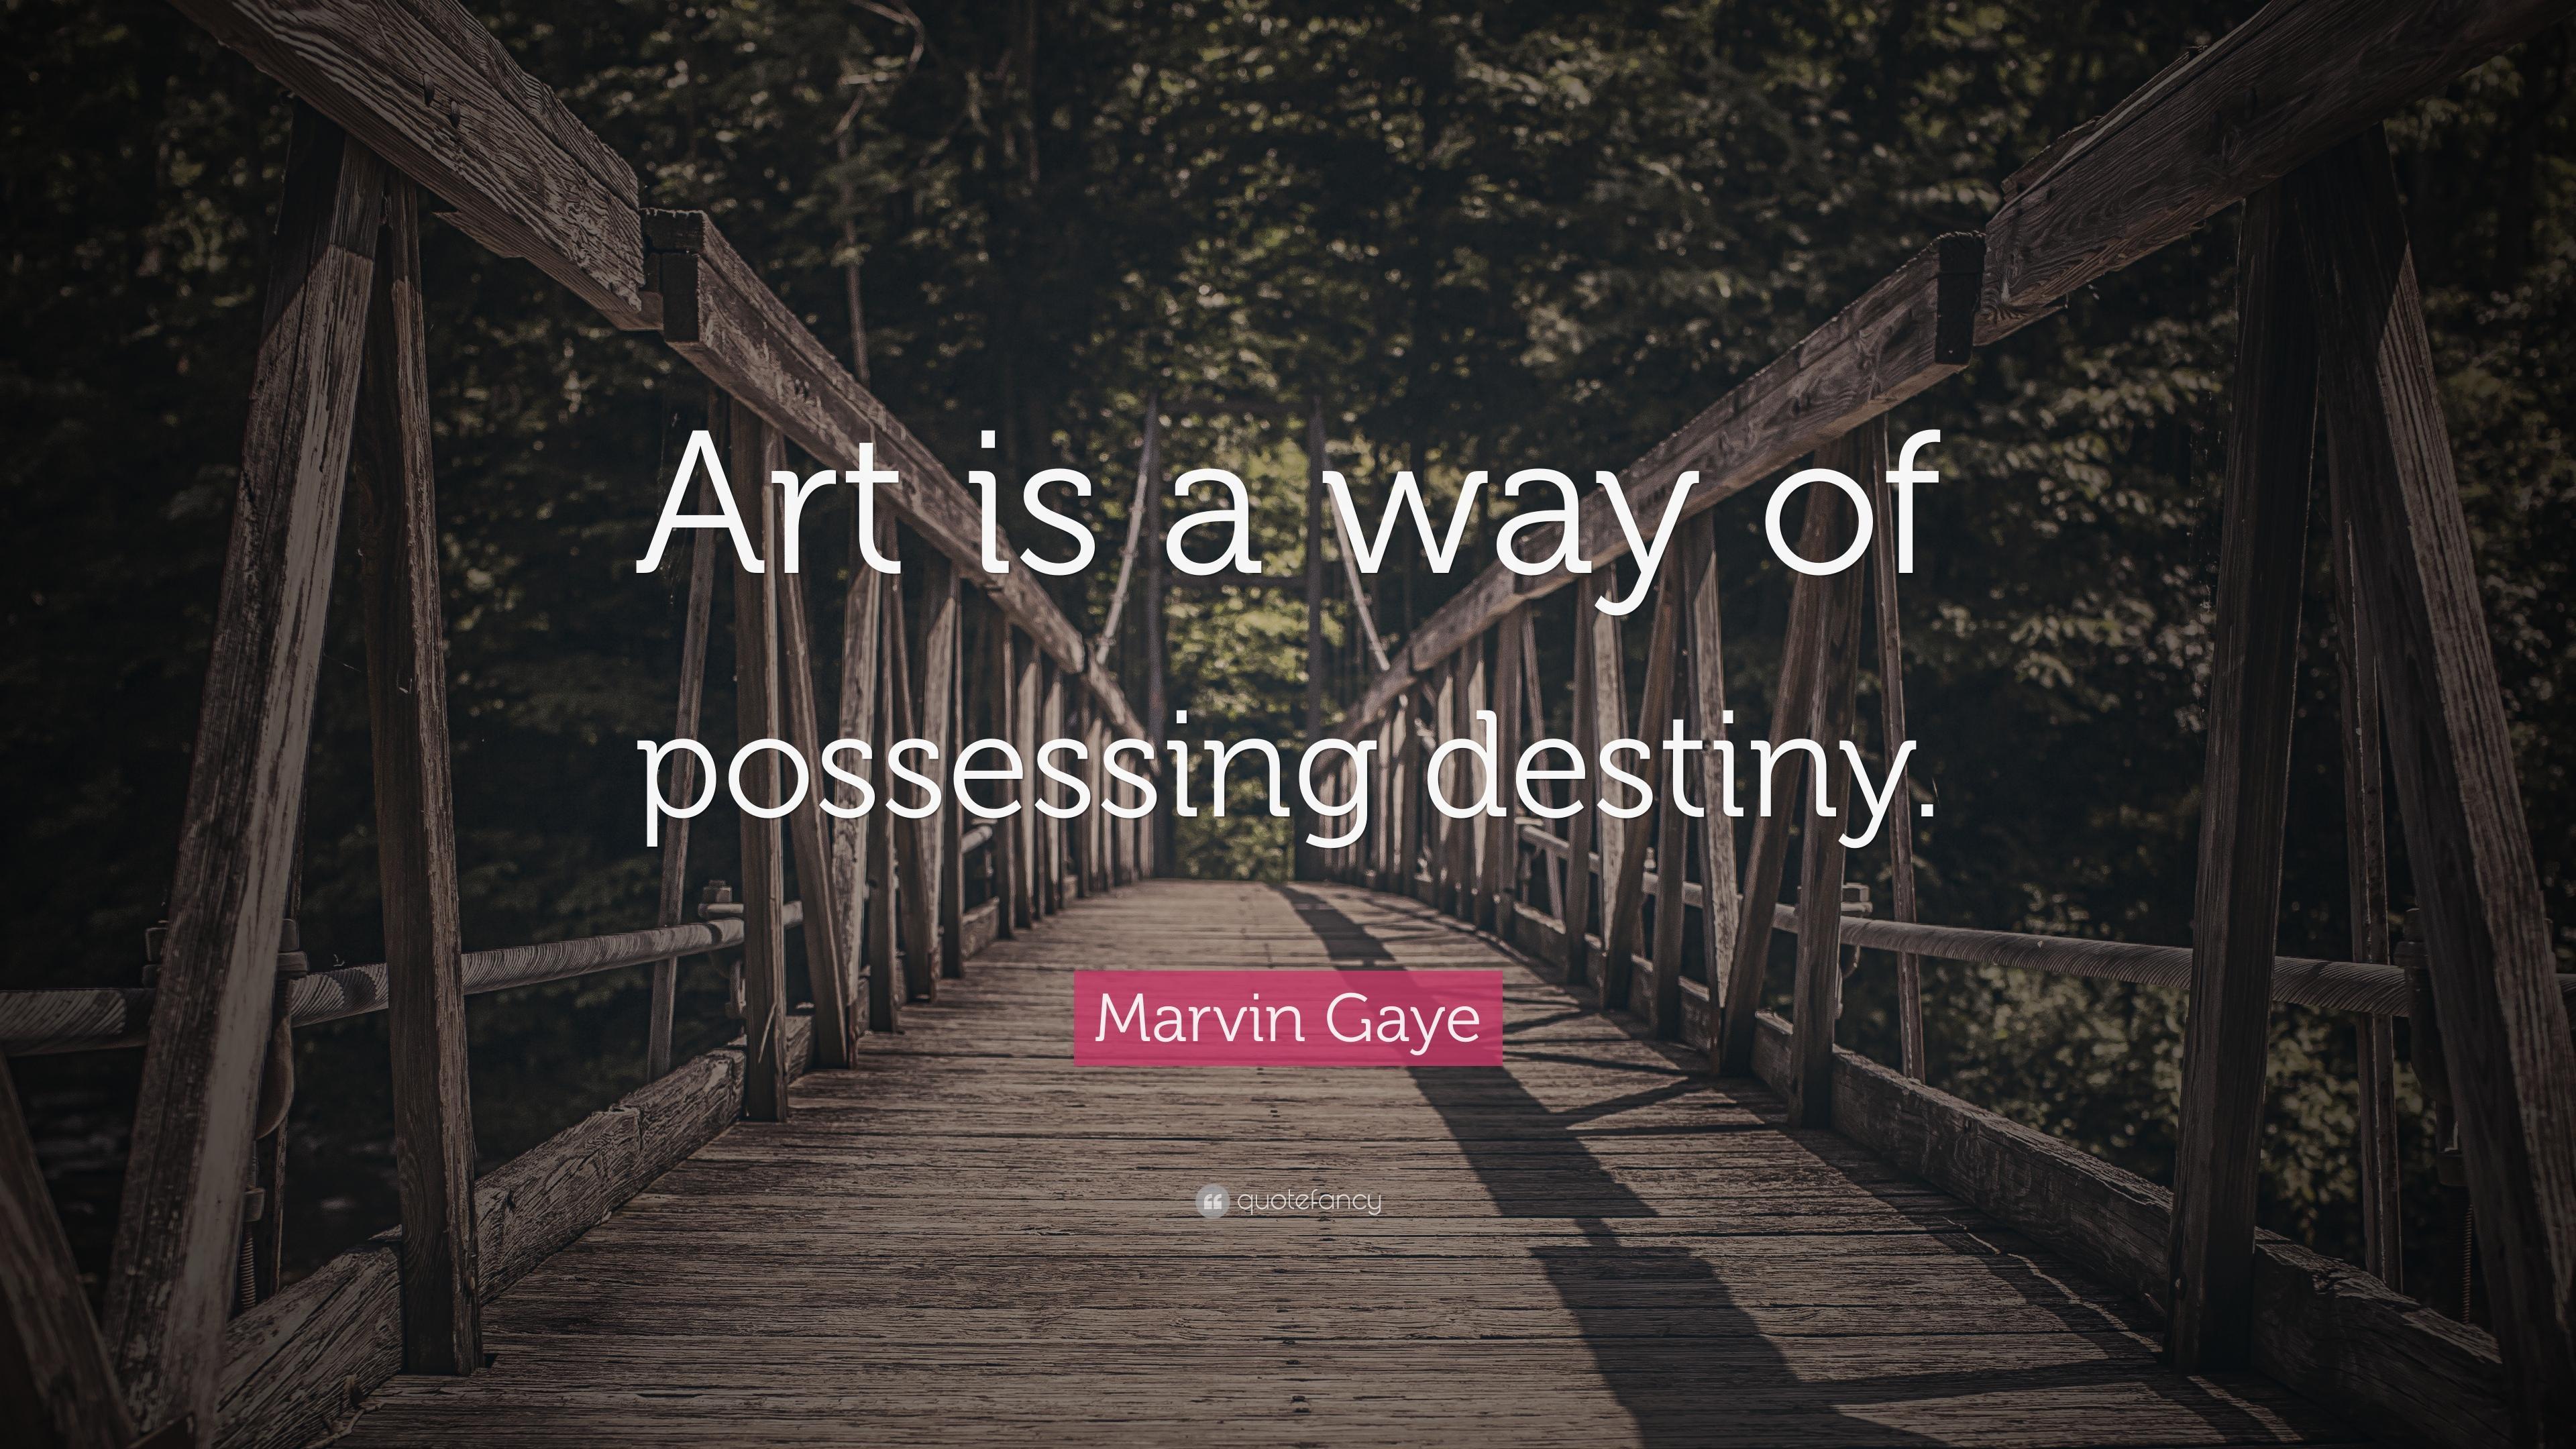 Marvin Gaye Quote: “Art is a way of possessing destiny.” 10